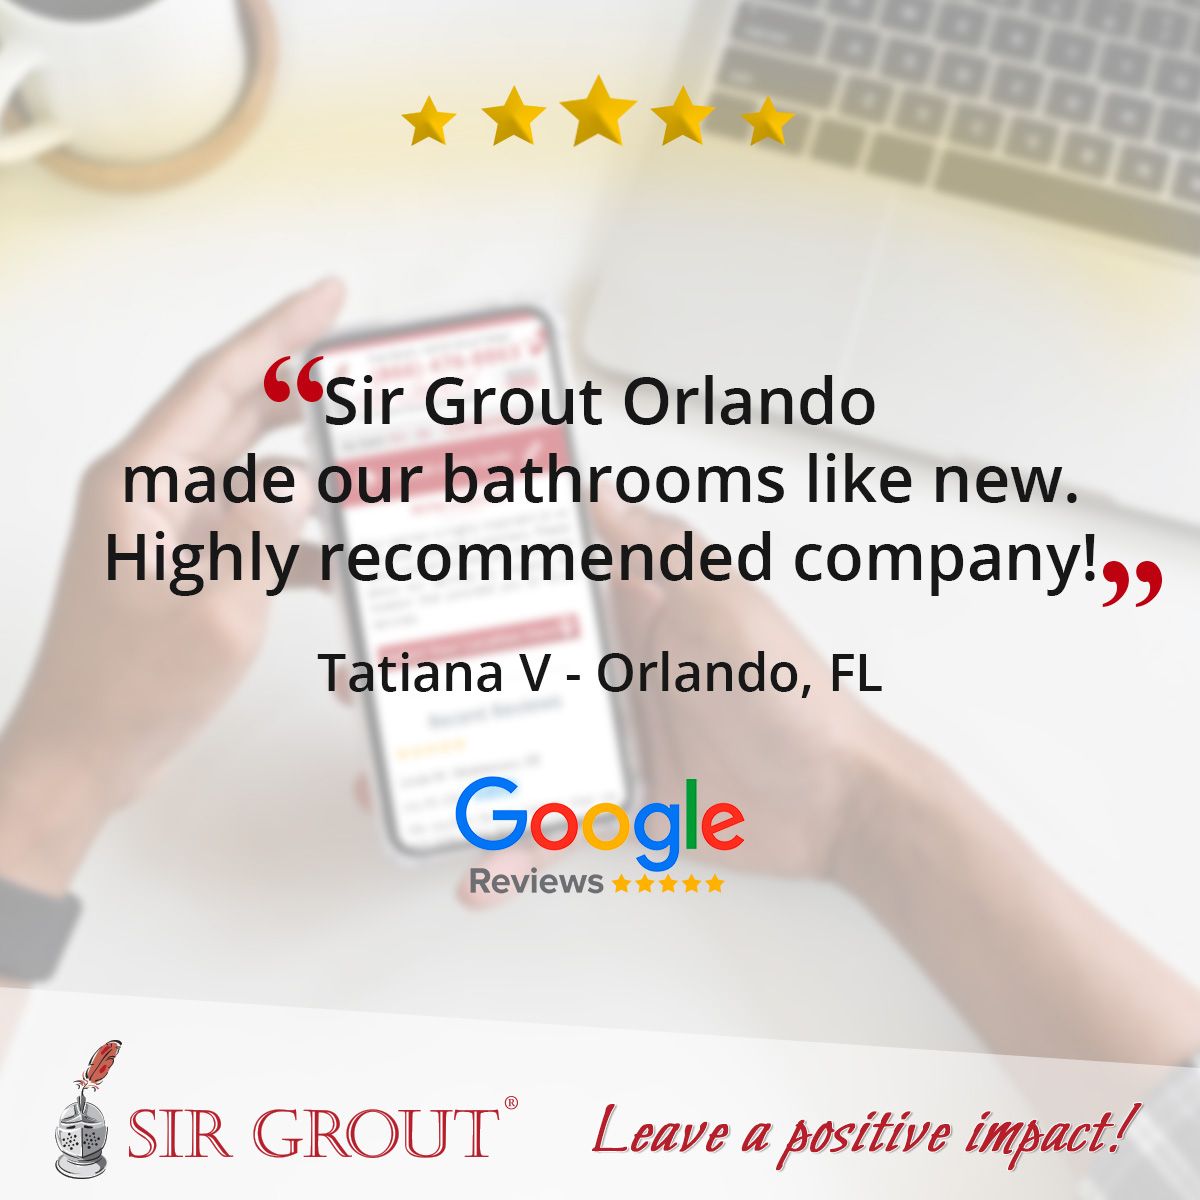 Sir Grout Orlando made our bathrooms like new. Highly recommended company!